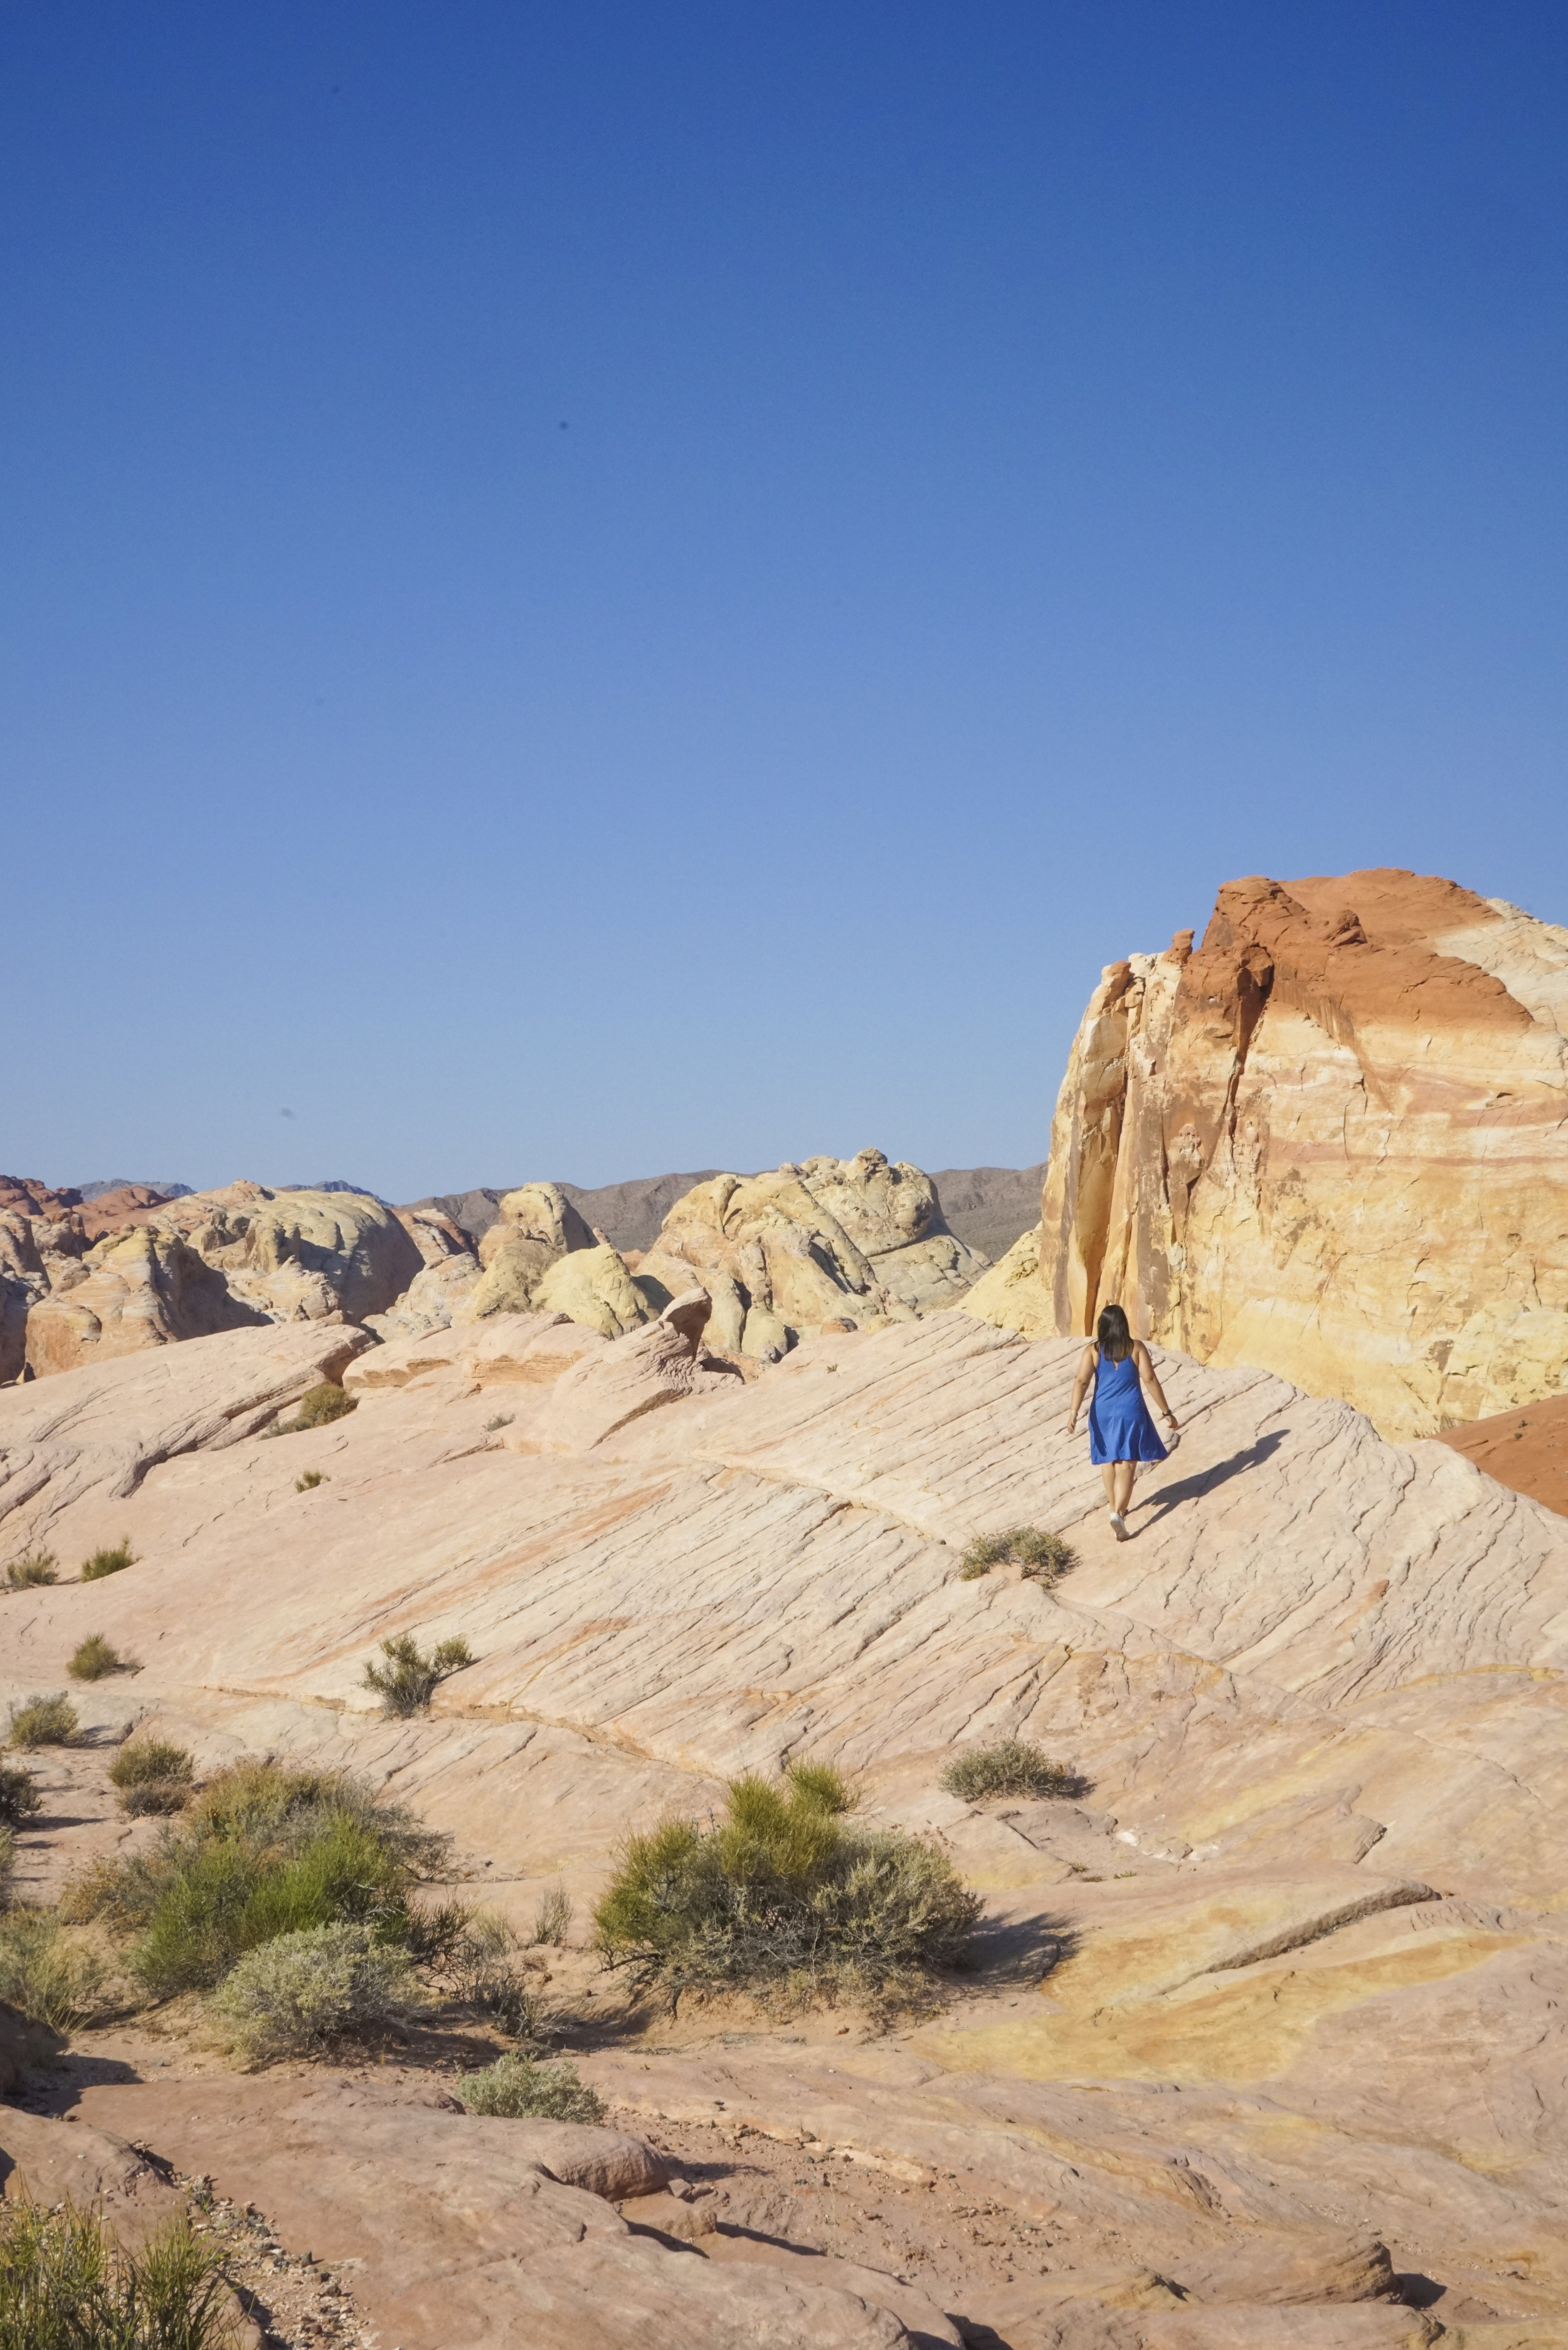 Valley of Fire - Shannon Did What?